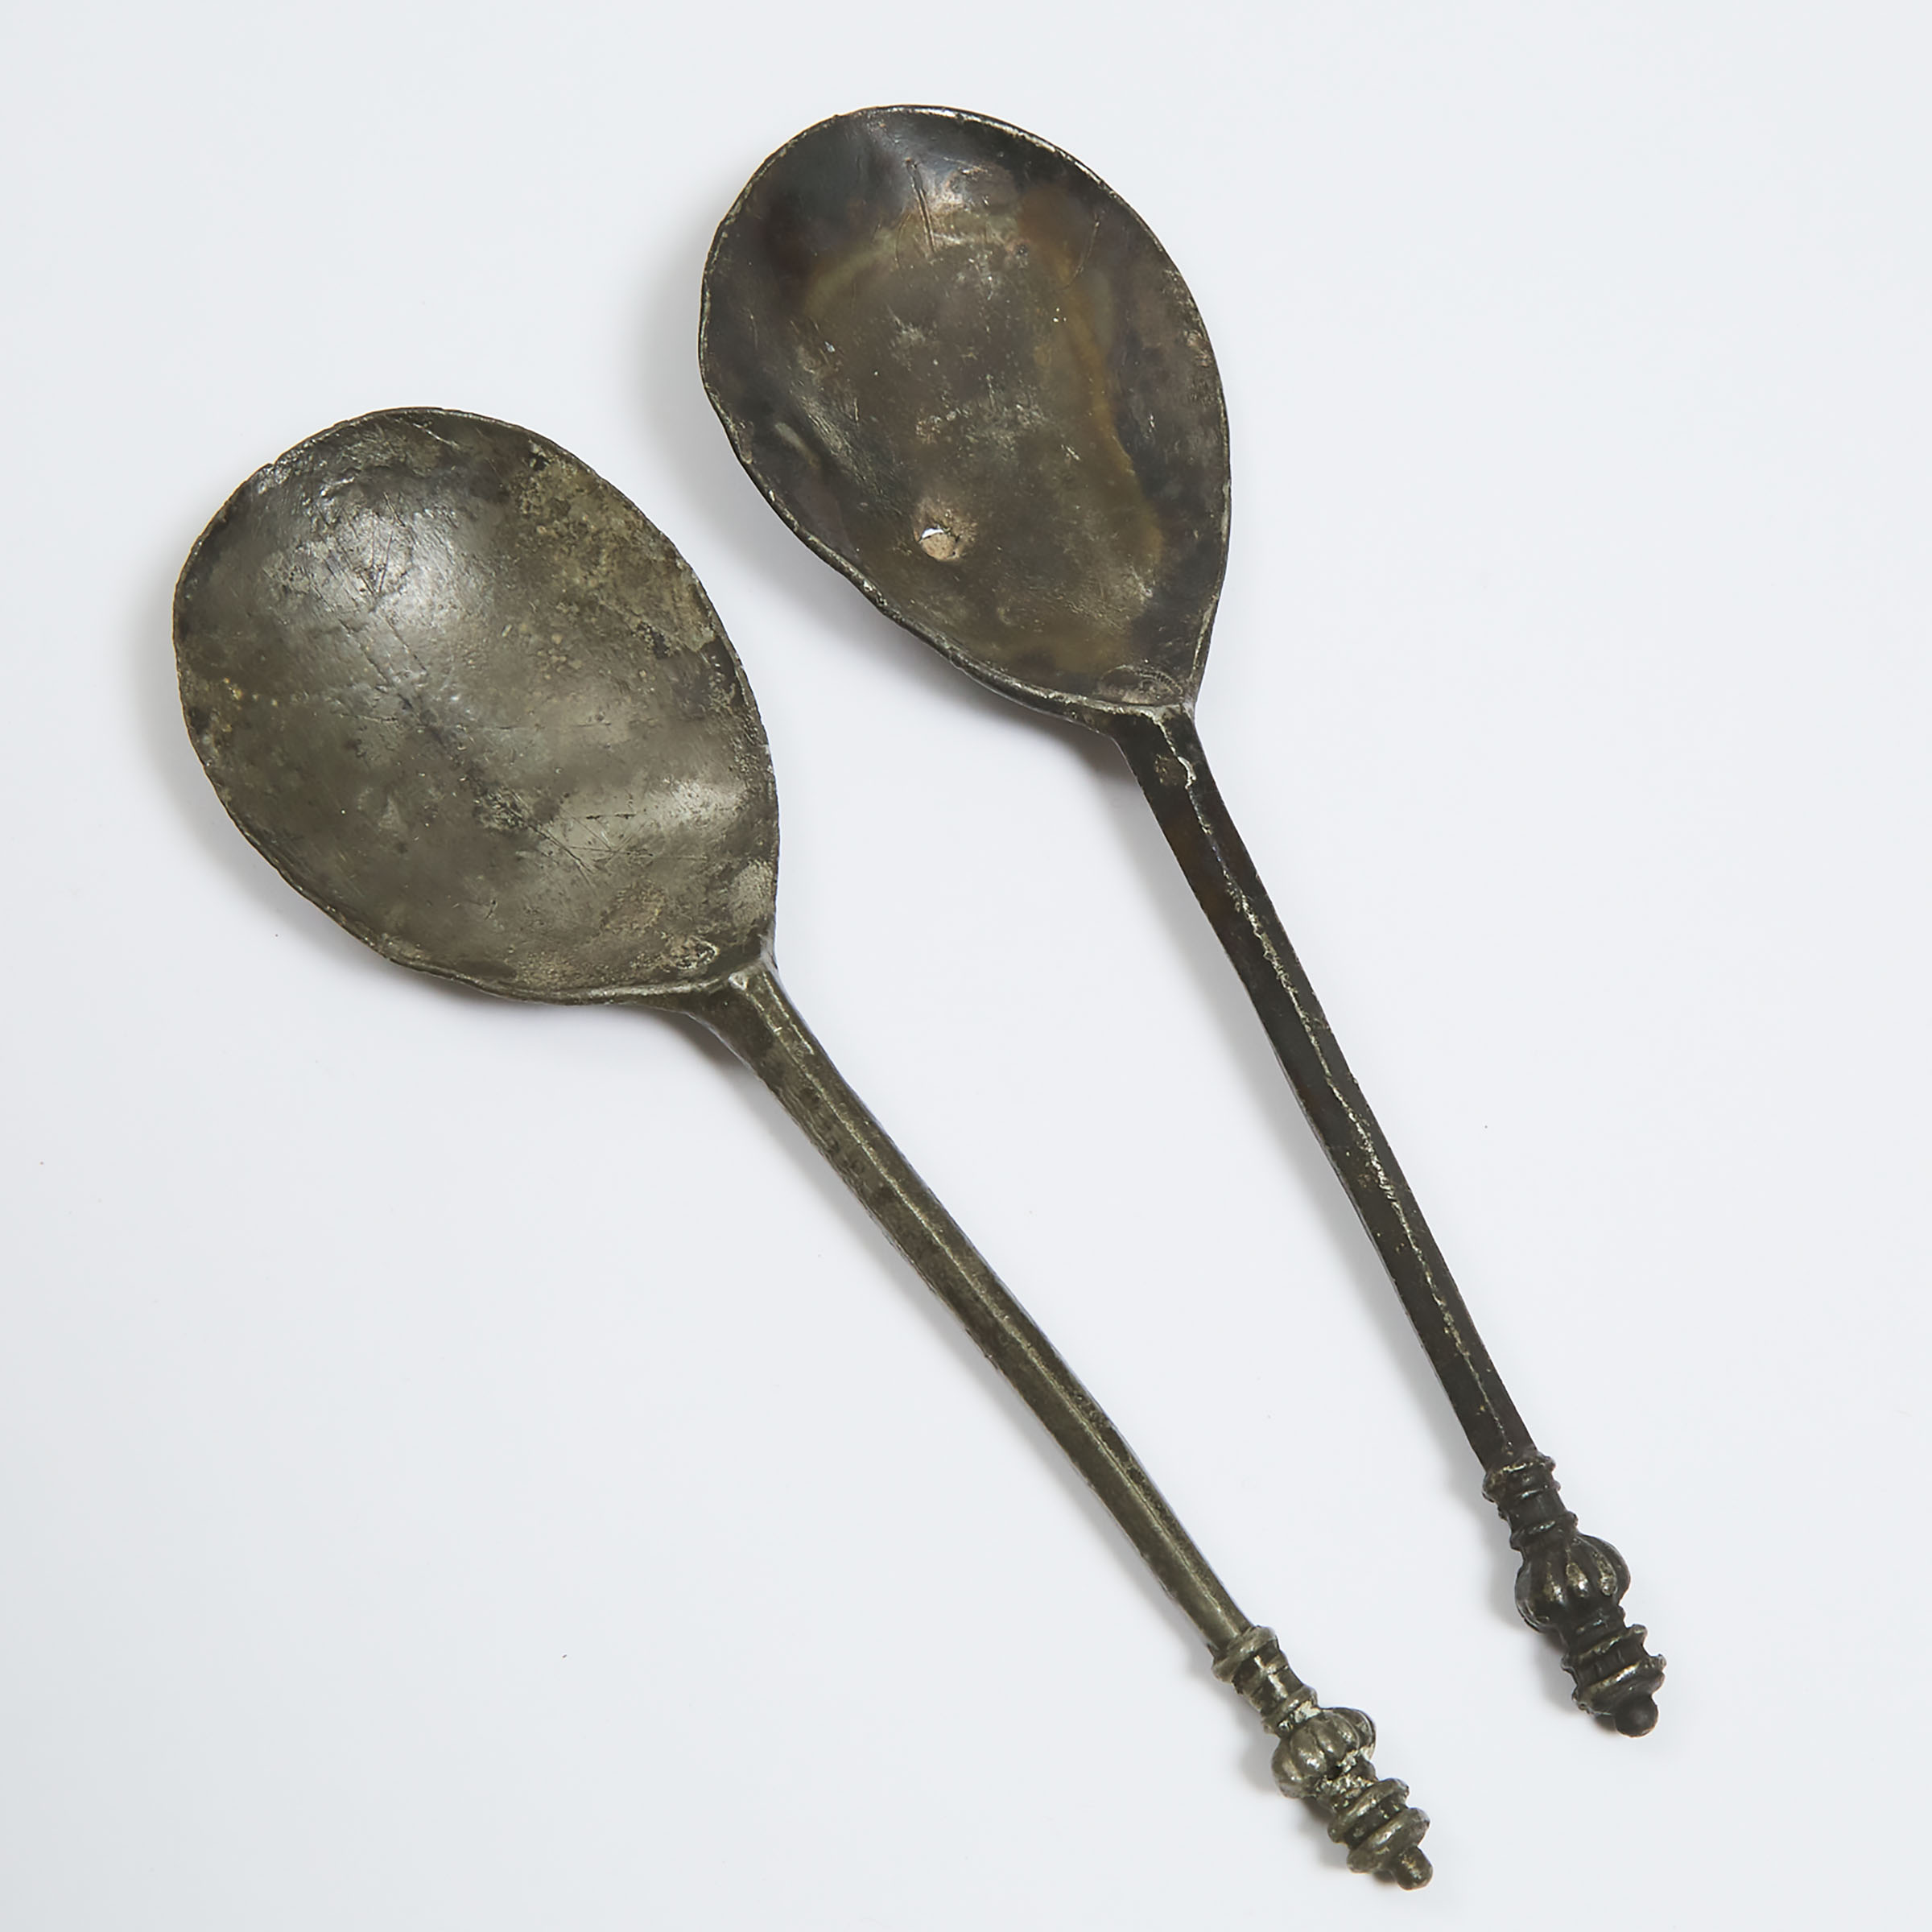 Two English Baluster Knop Spoons, 16th century